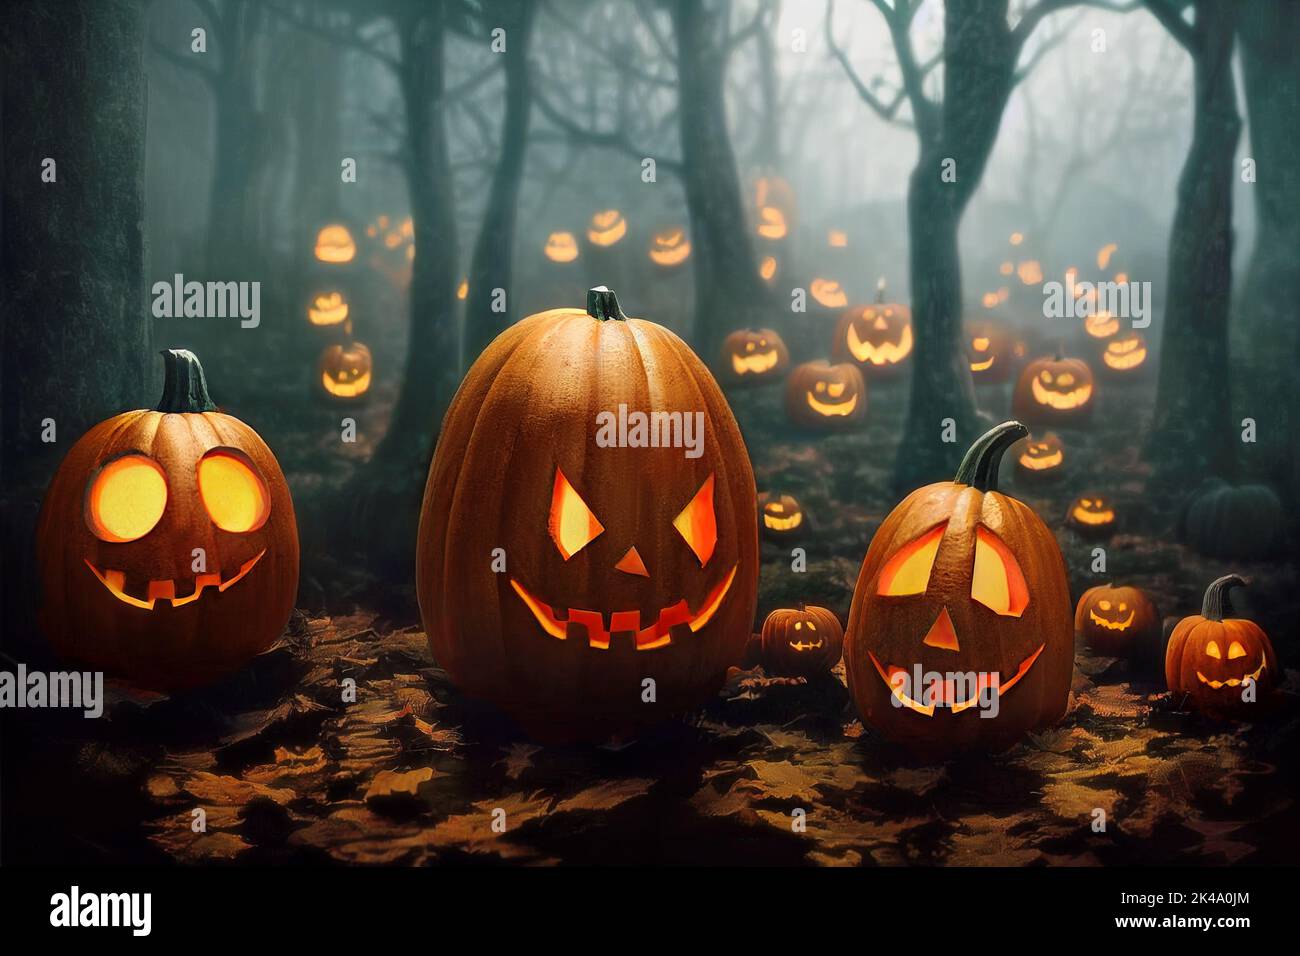 Halloween pumpkins with scary smiles and glowing eyes in misty forest at night. Digital illustration Stock Photo